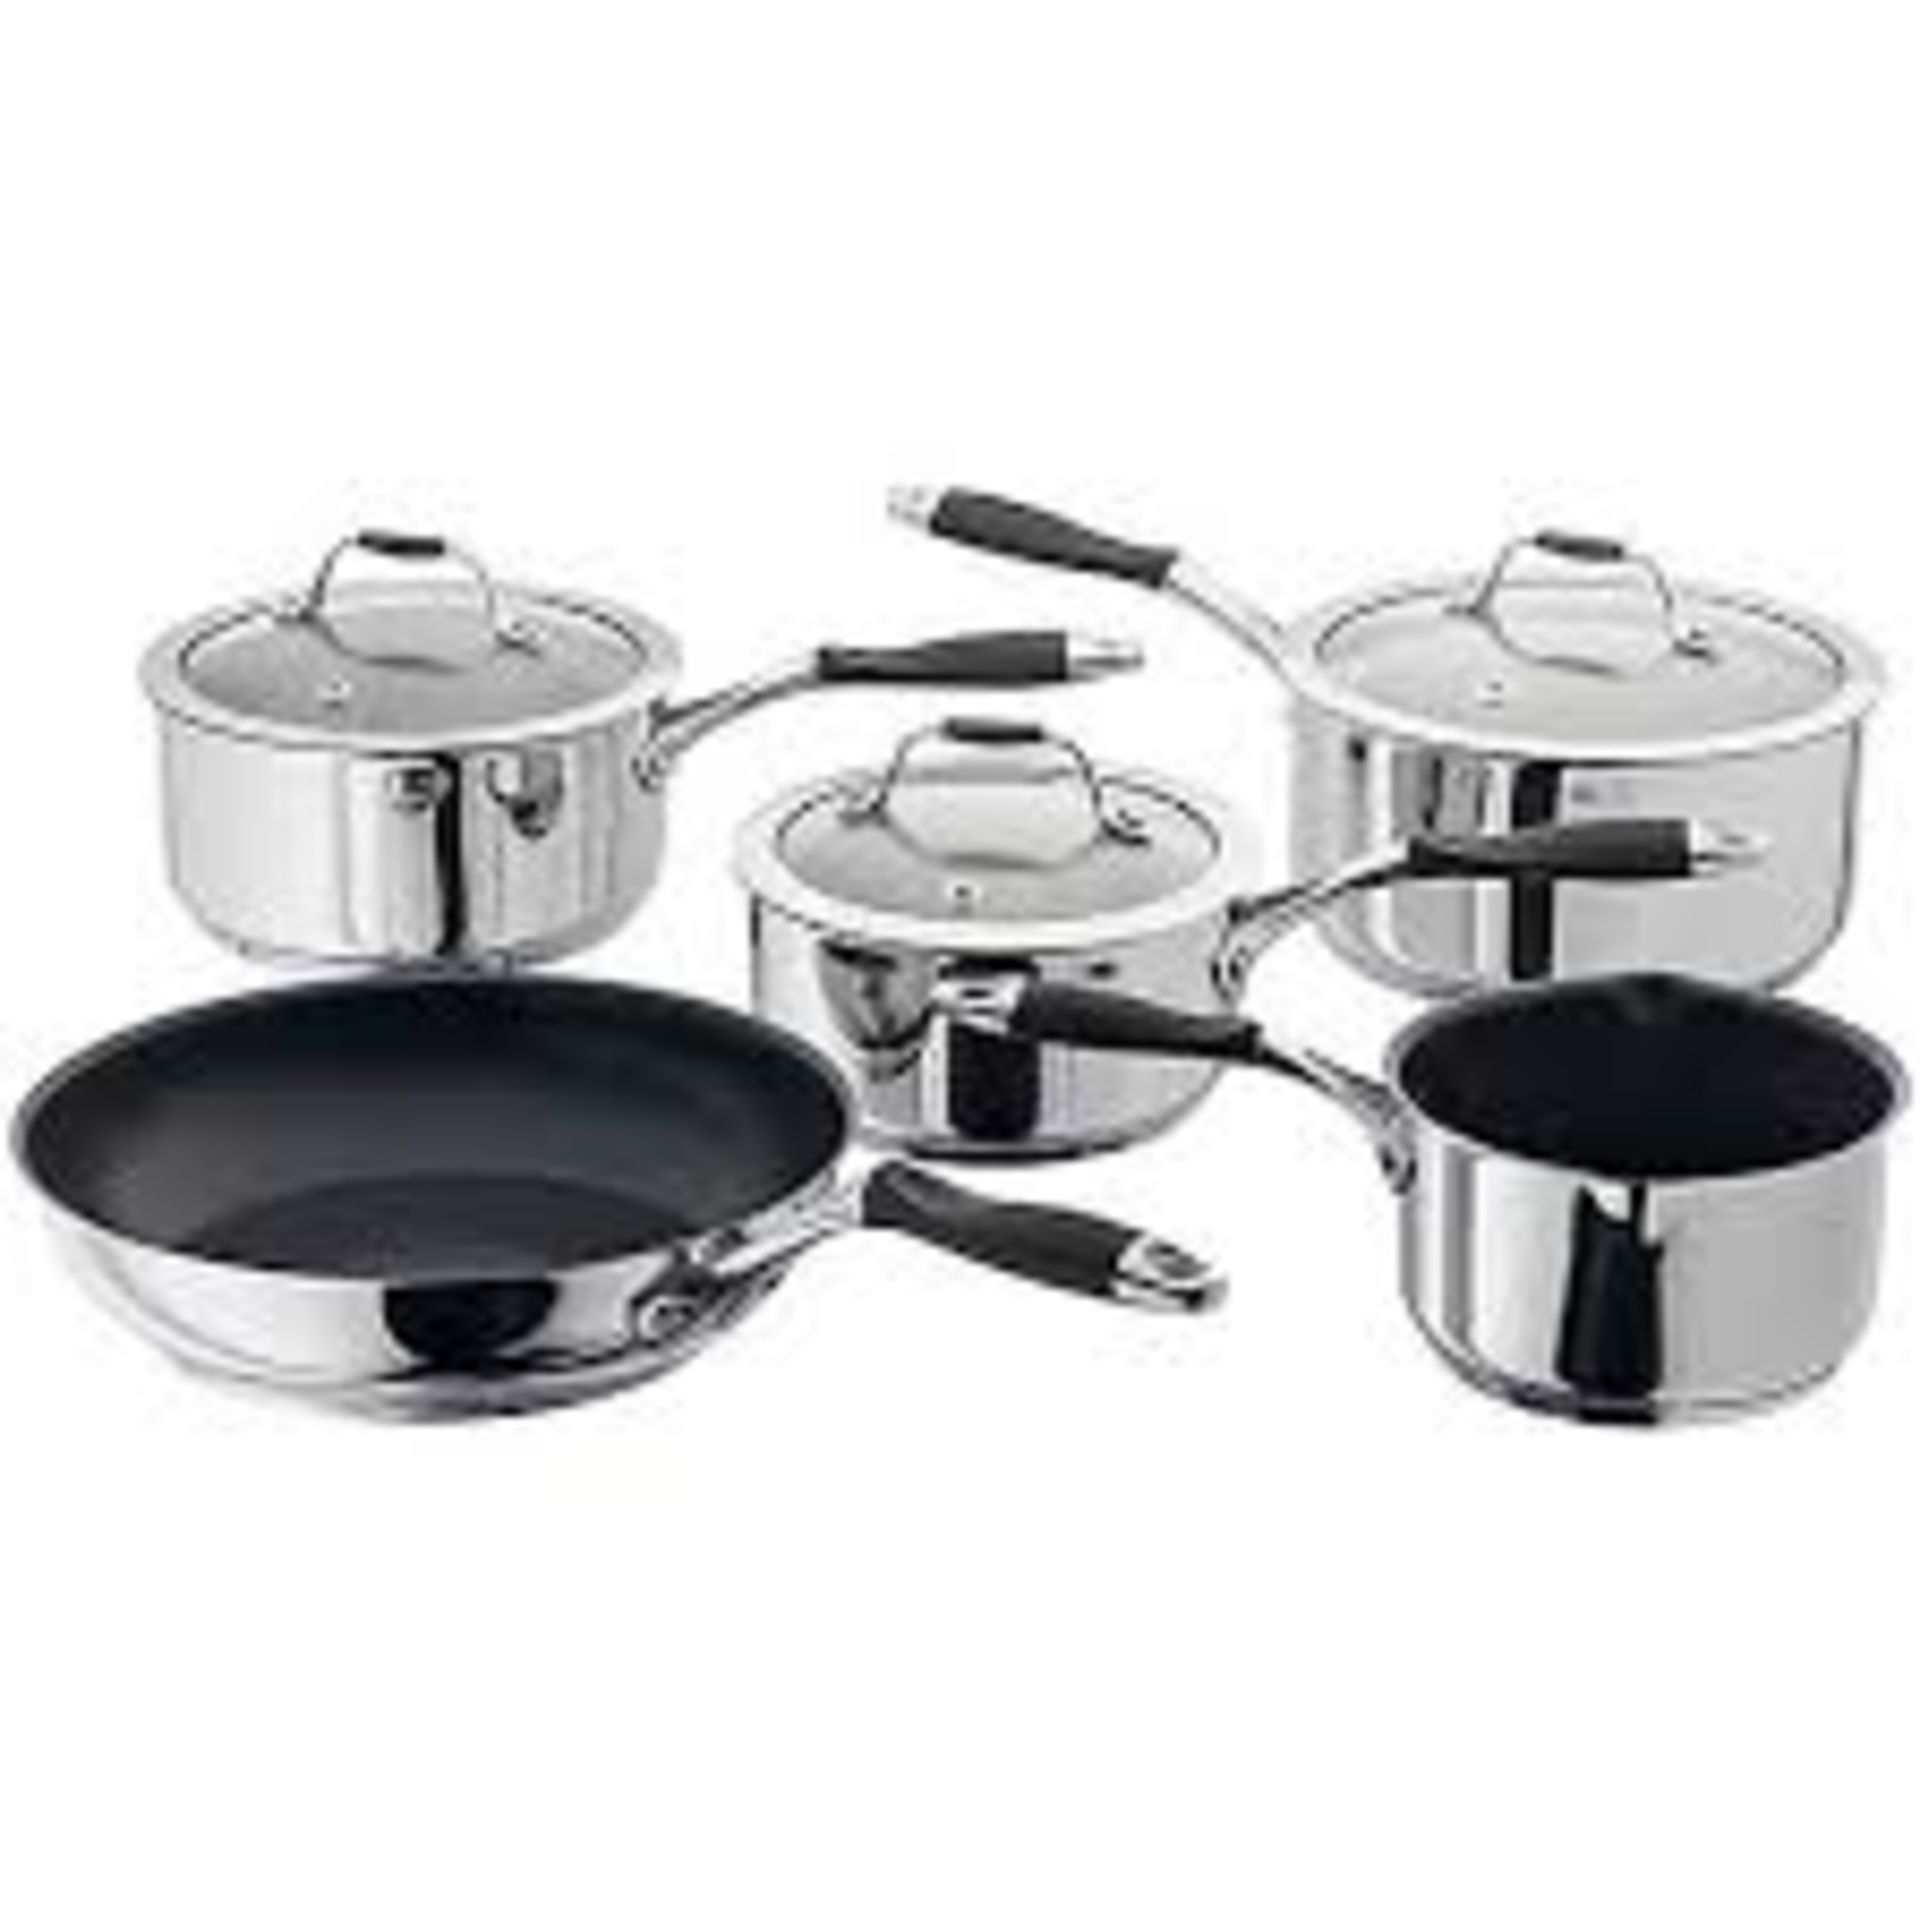 12 X BOXED SETS OF URBNCHEF 3 PIECE STAINLESS STEEL PAN SETS. EACH SET INCLUDES: 16CM SAUCE PAN WITH - Image 2 of 2